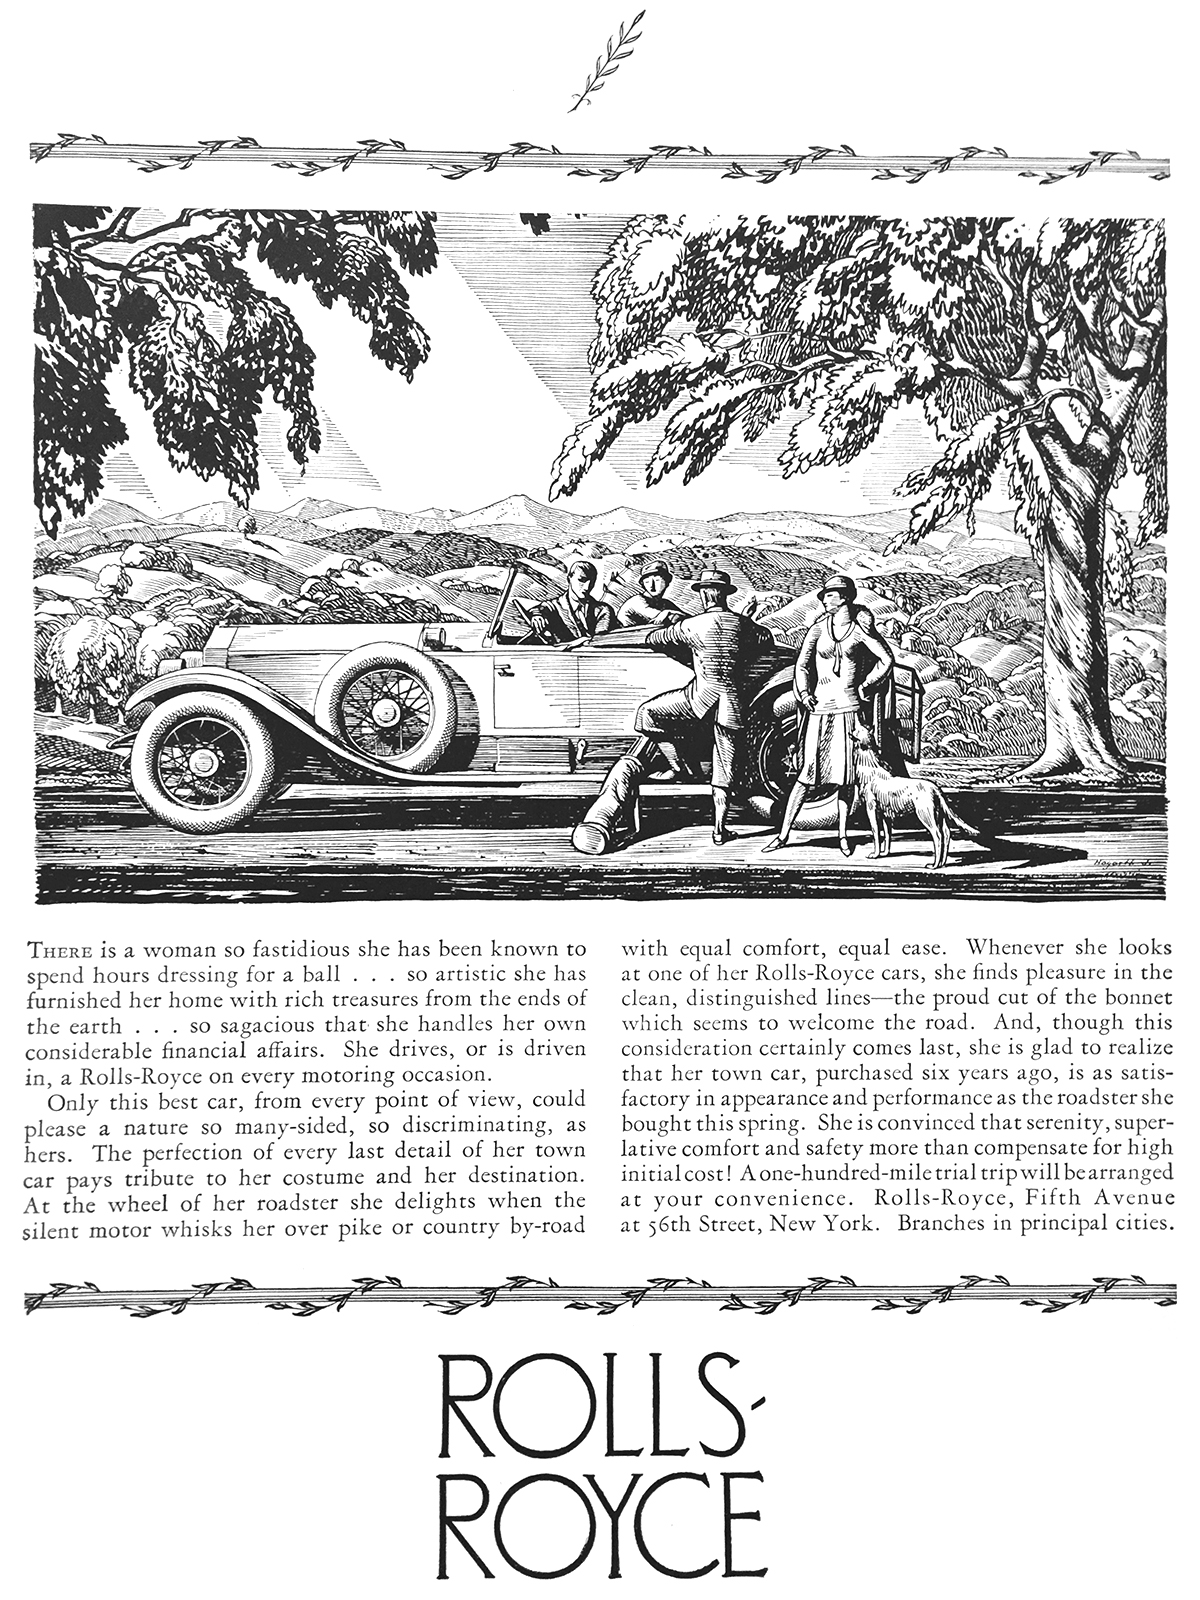 Rolls-Royce Ad (June, 1926): Illustrated by Rockwell Kent 